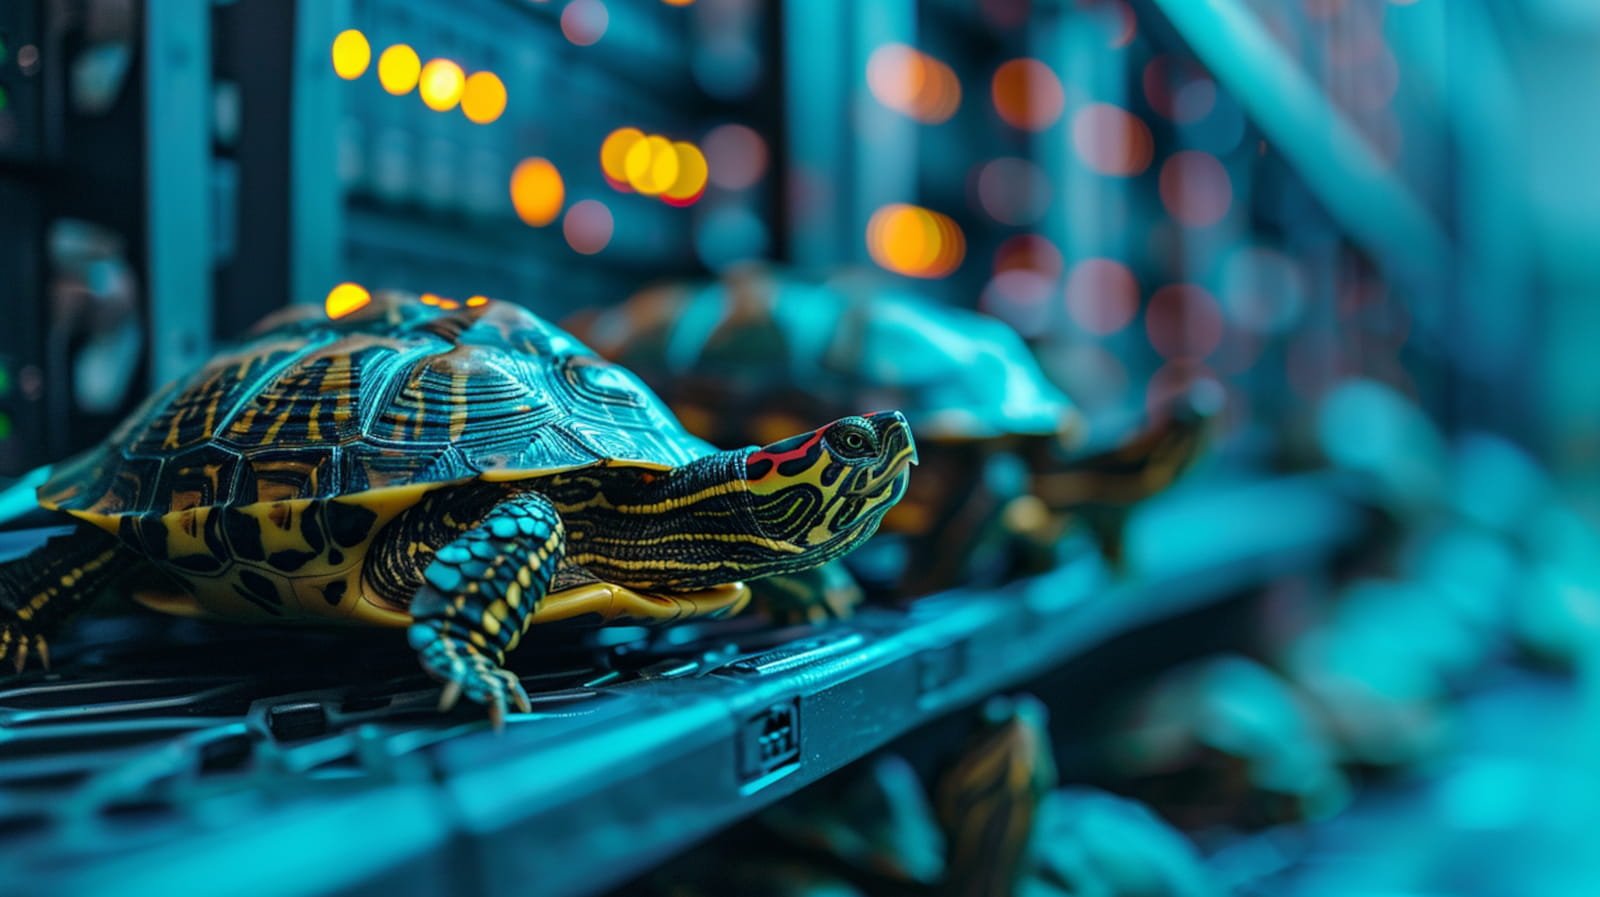 Nearly 11 million SSH servers vulnerable to new Terrapin attacks